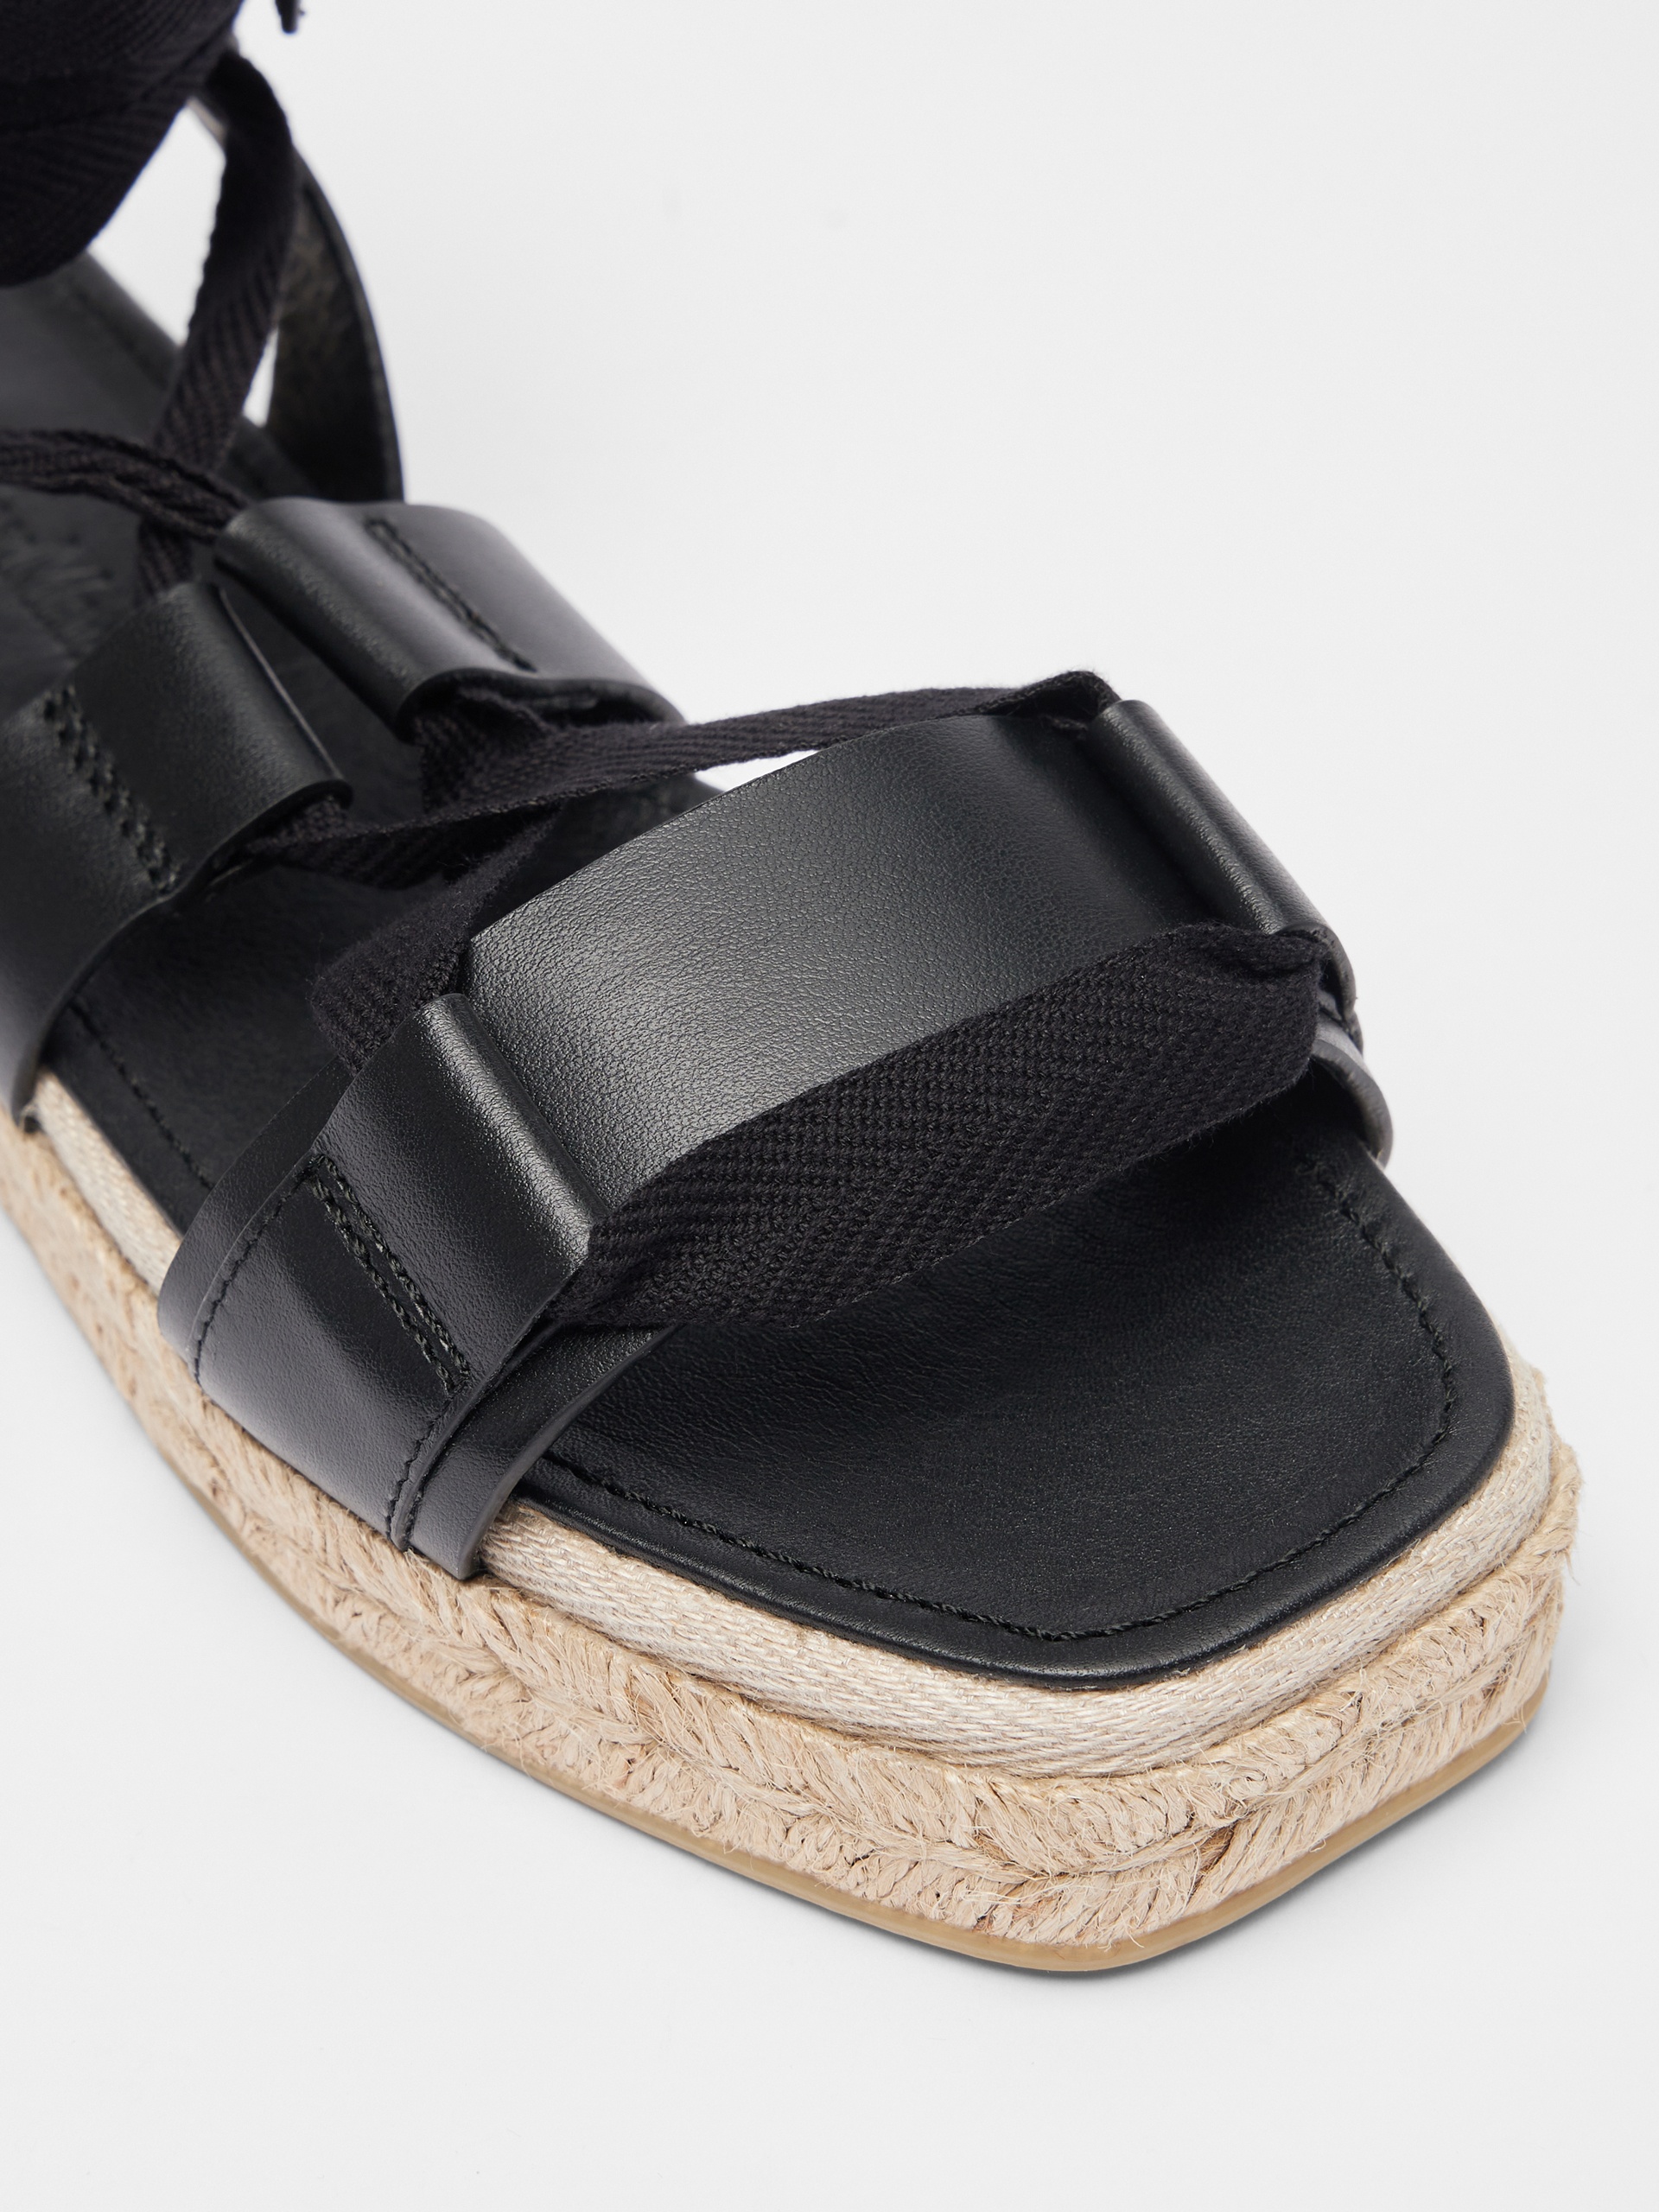 ELIDE2 Nappa leather sandals - 4